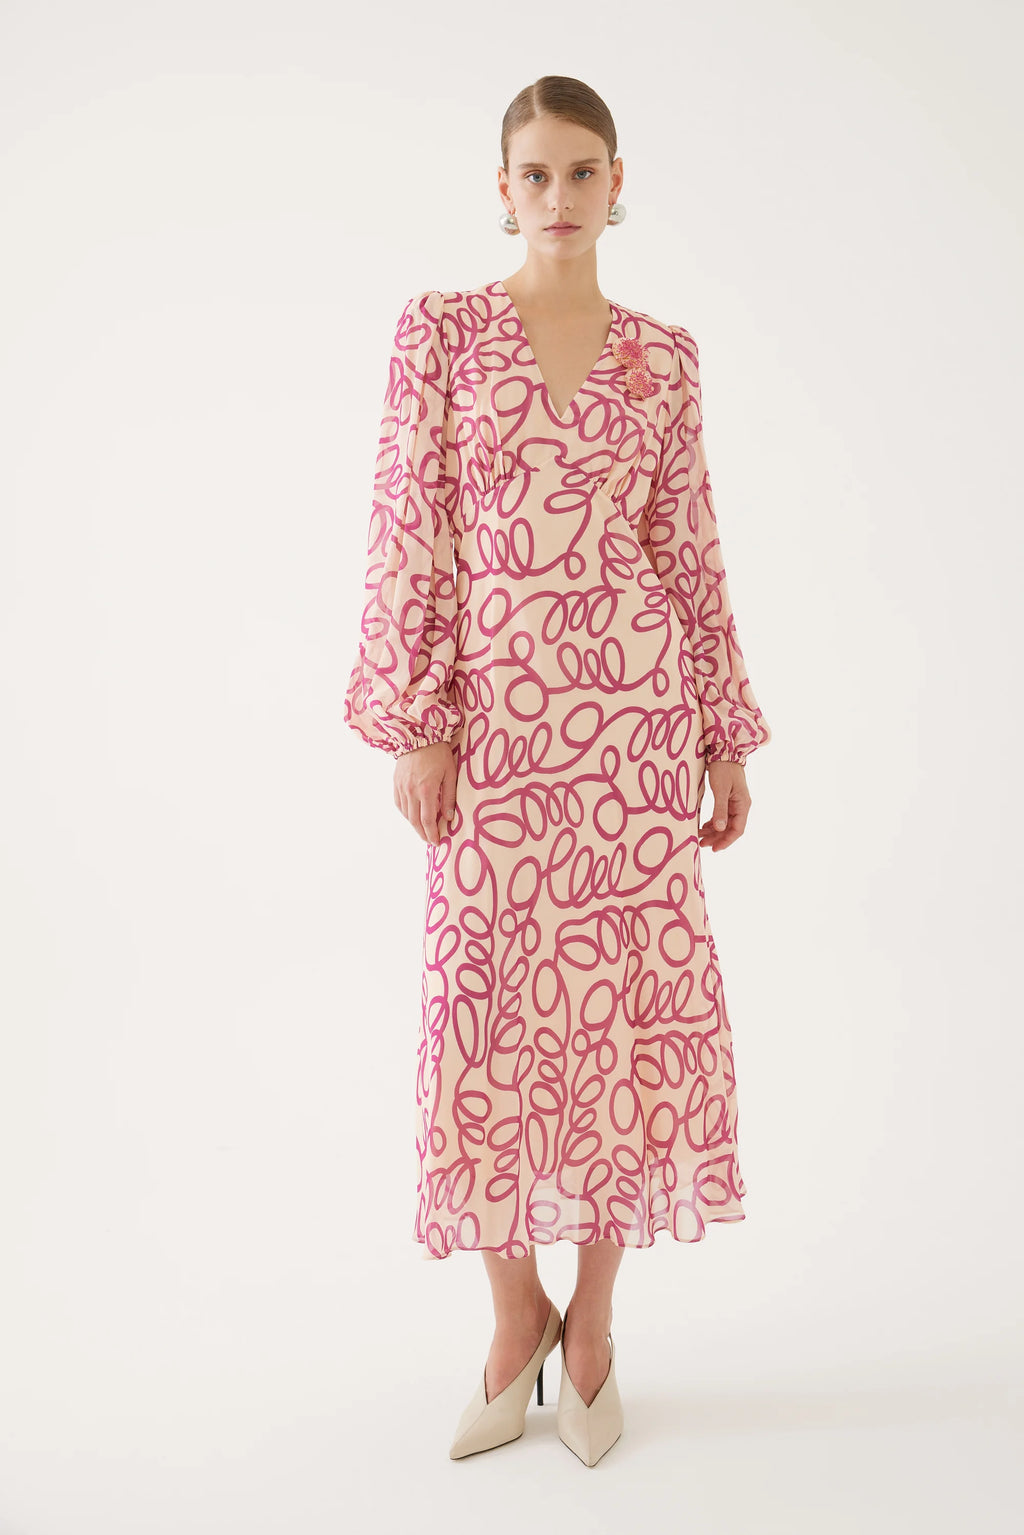 <p>Exquise swirl print empire dress with long sleeves in beige and magenta</p>
<p>Product code 4218038</p>